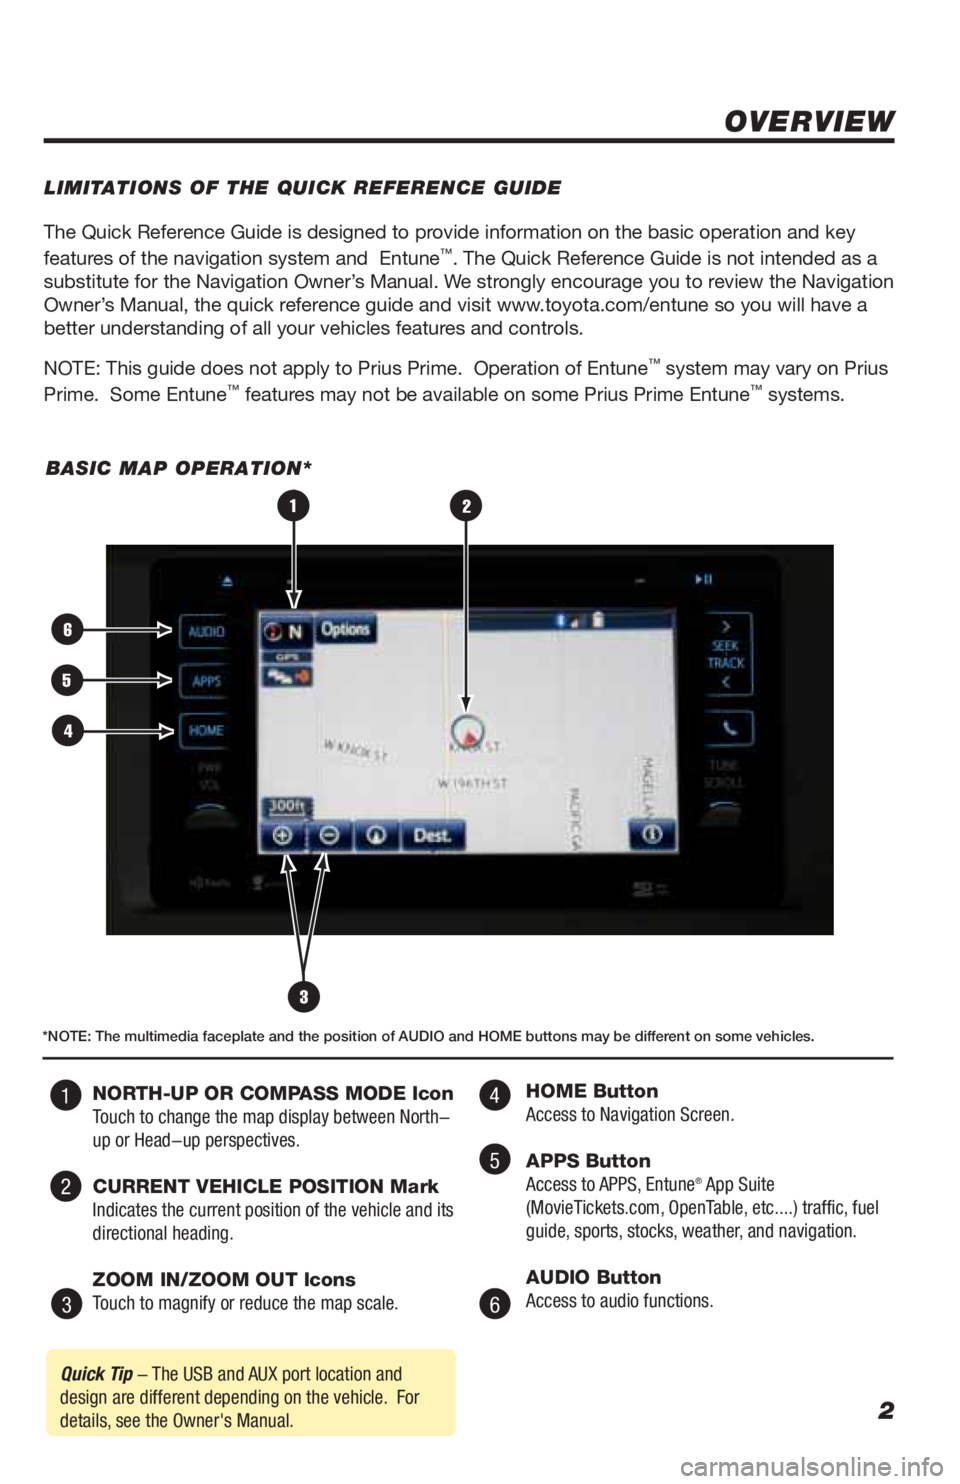 TOYOTA TUNDRA 2019  Accessories, Audio & Navigation (in English) 2
The Quick Reference Guide is designed to provide information on the basic operation and key 
features of the navigation system and  Entune™. The Quick Reference Guide is not intended as a 
substit